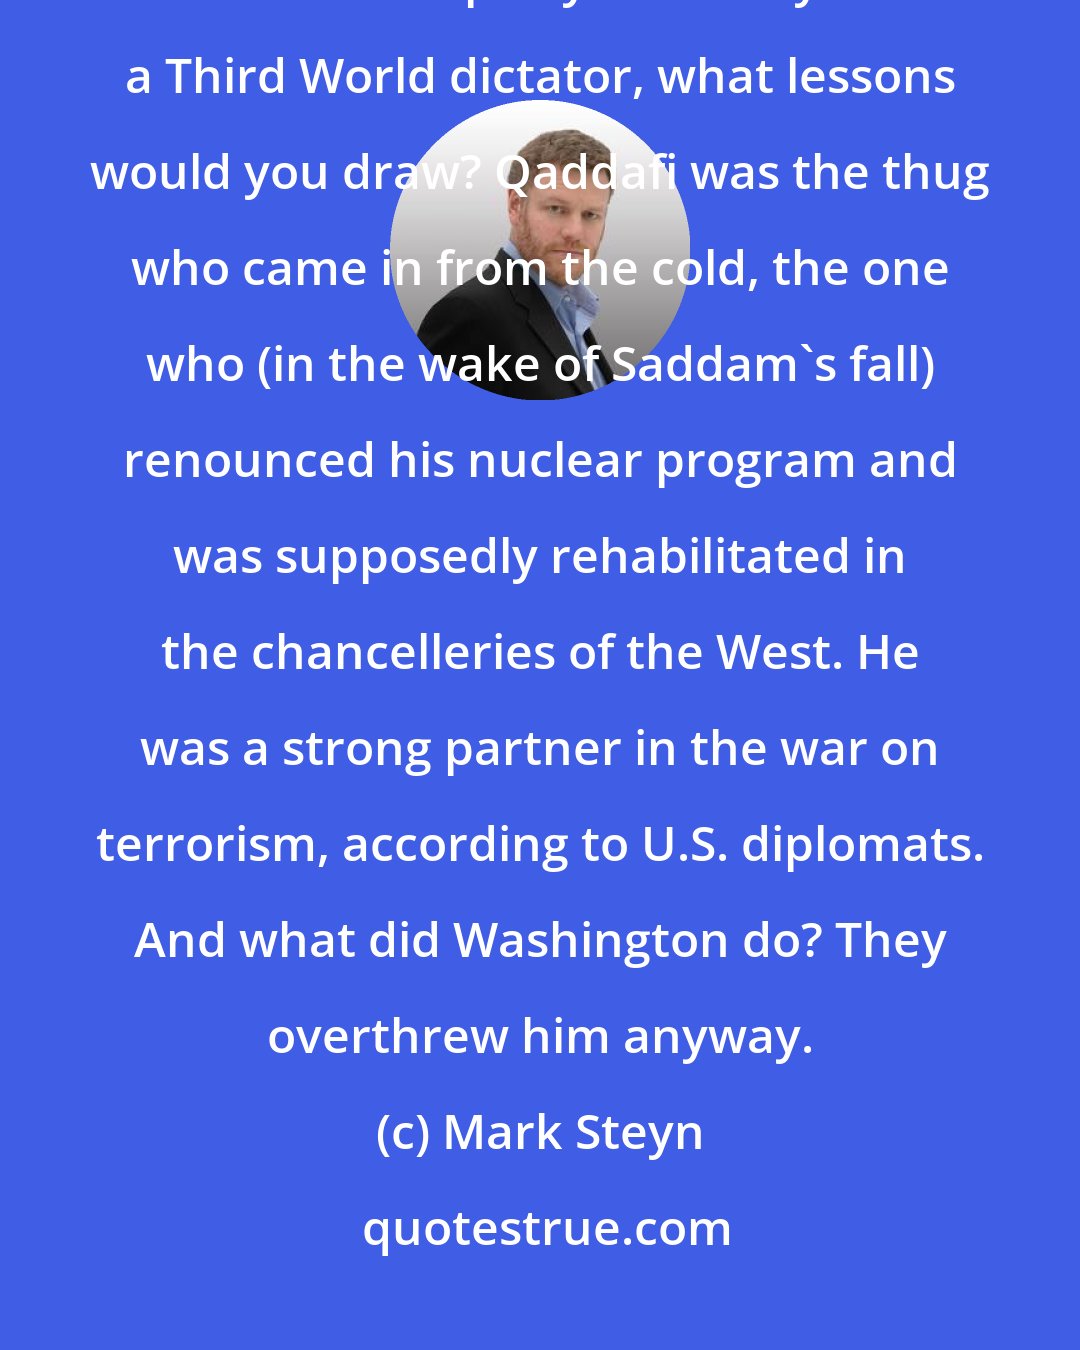 Mark Steyn: Alternatively, suppose Qaddafi winds up hanging from a lamppost in his favorite party dress. If you're a Third World dictator, what lessons would you draw? Qaddafi was the thug who came in from the cold, the one who (in the wake of Saddam's fall) renounced his nuclear program and was supposedly rehabilitated in the chancelleries of the West. He was a strong partner in the war on terrorism, according to U.S. diplomats. And what did Washington do? They overthrew him anyway.